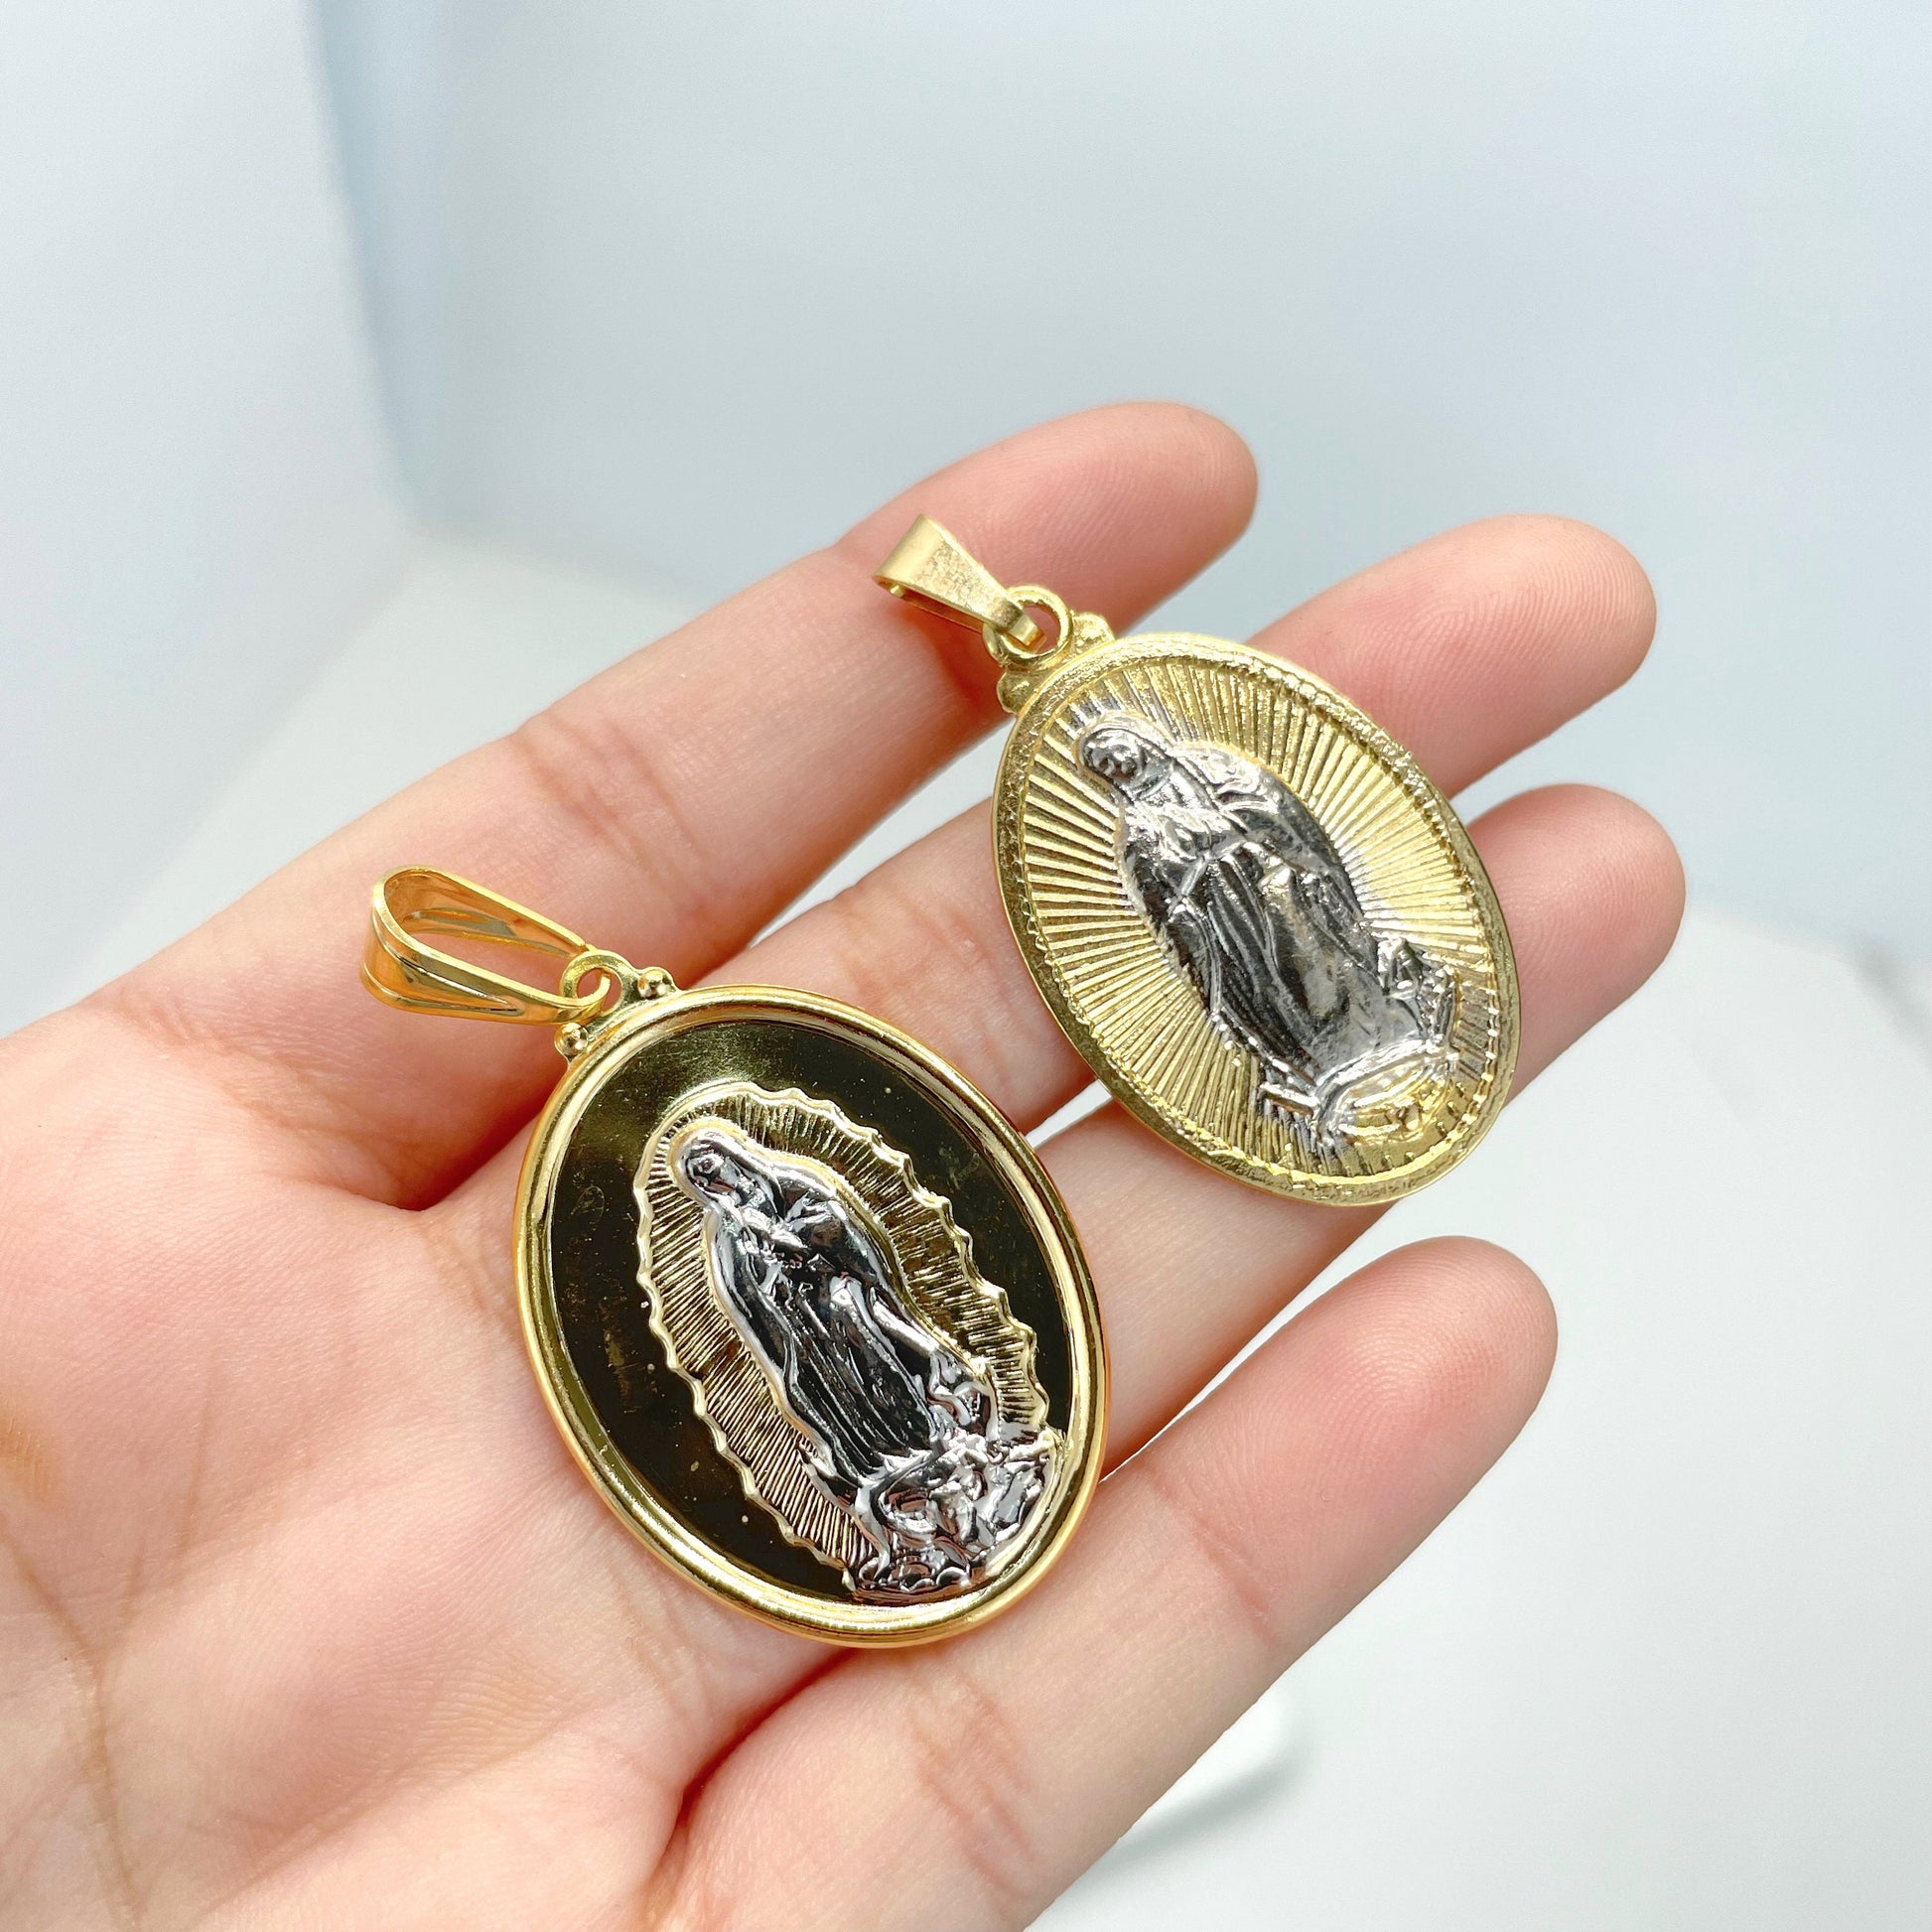 18k Gold Filled Our Lady of Guadalupe (Virgen de Guadalupe) Two Tone, Plain or Texturized Charms Pendant Wholesale Jewelry Making Supplies